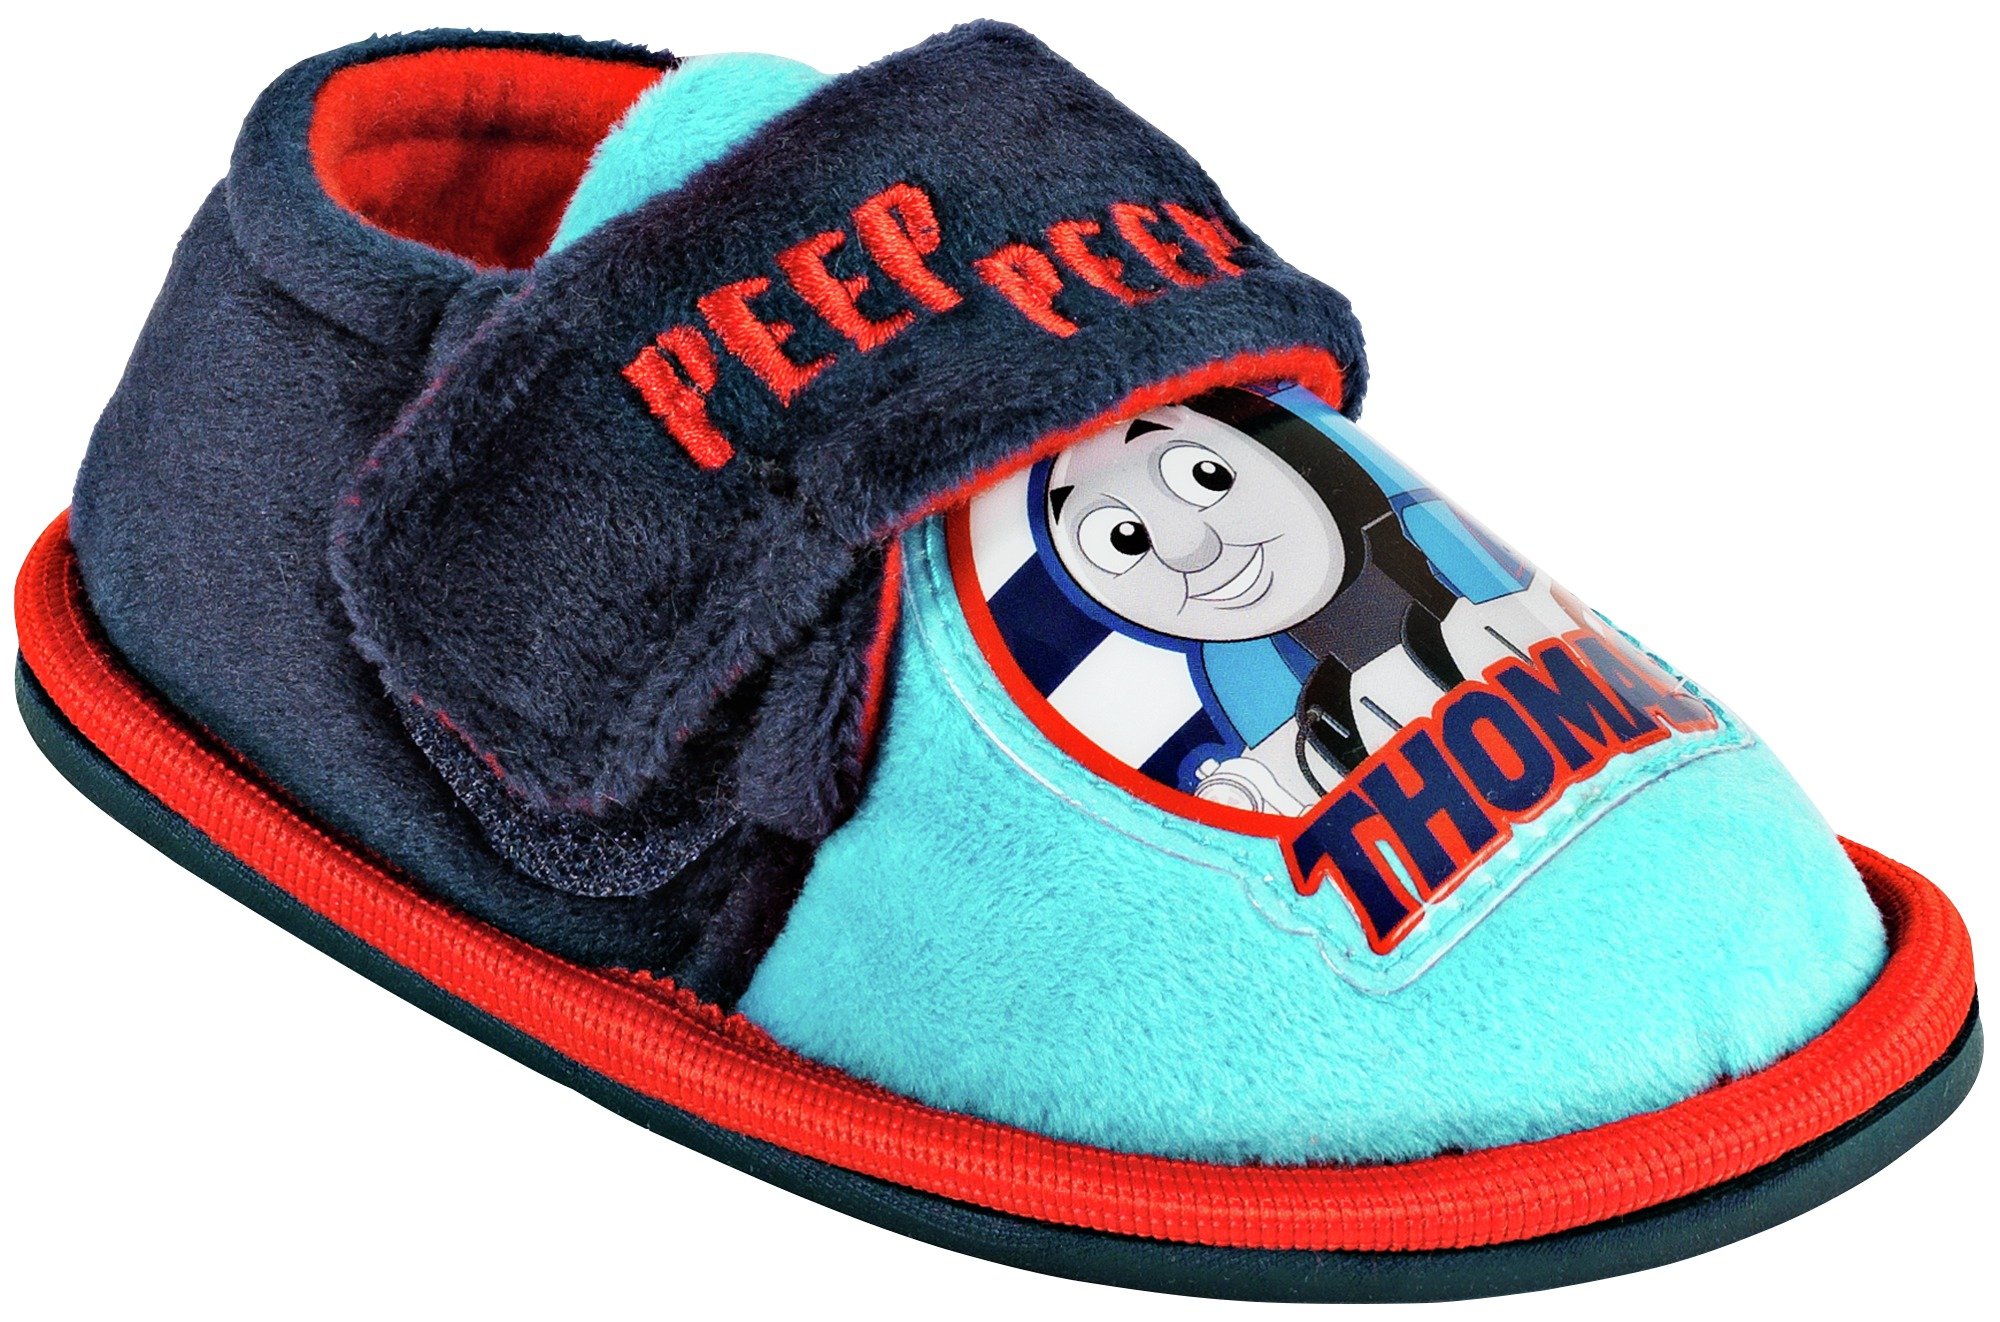 Thomas & Friends Toddle Slippers - Size 6.